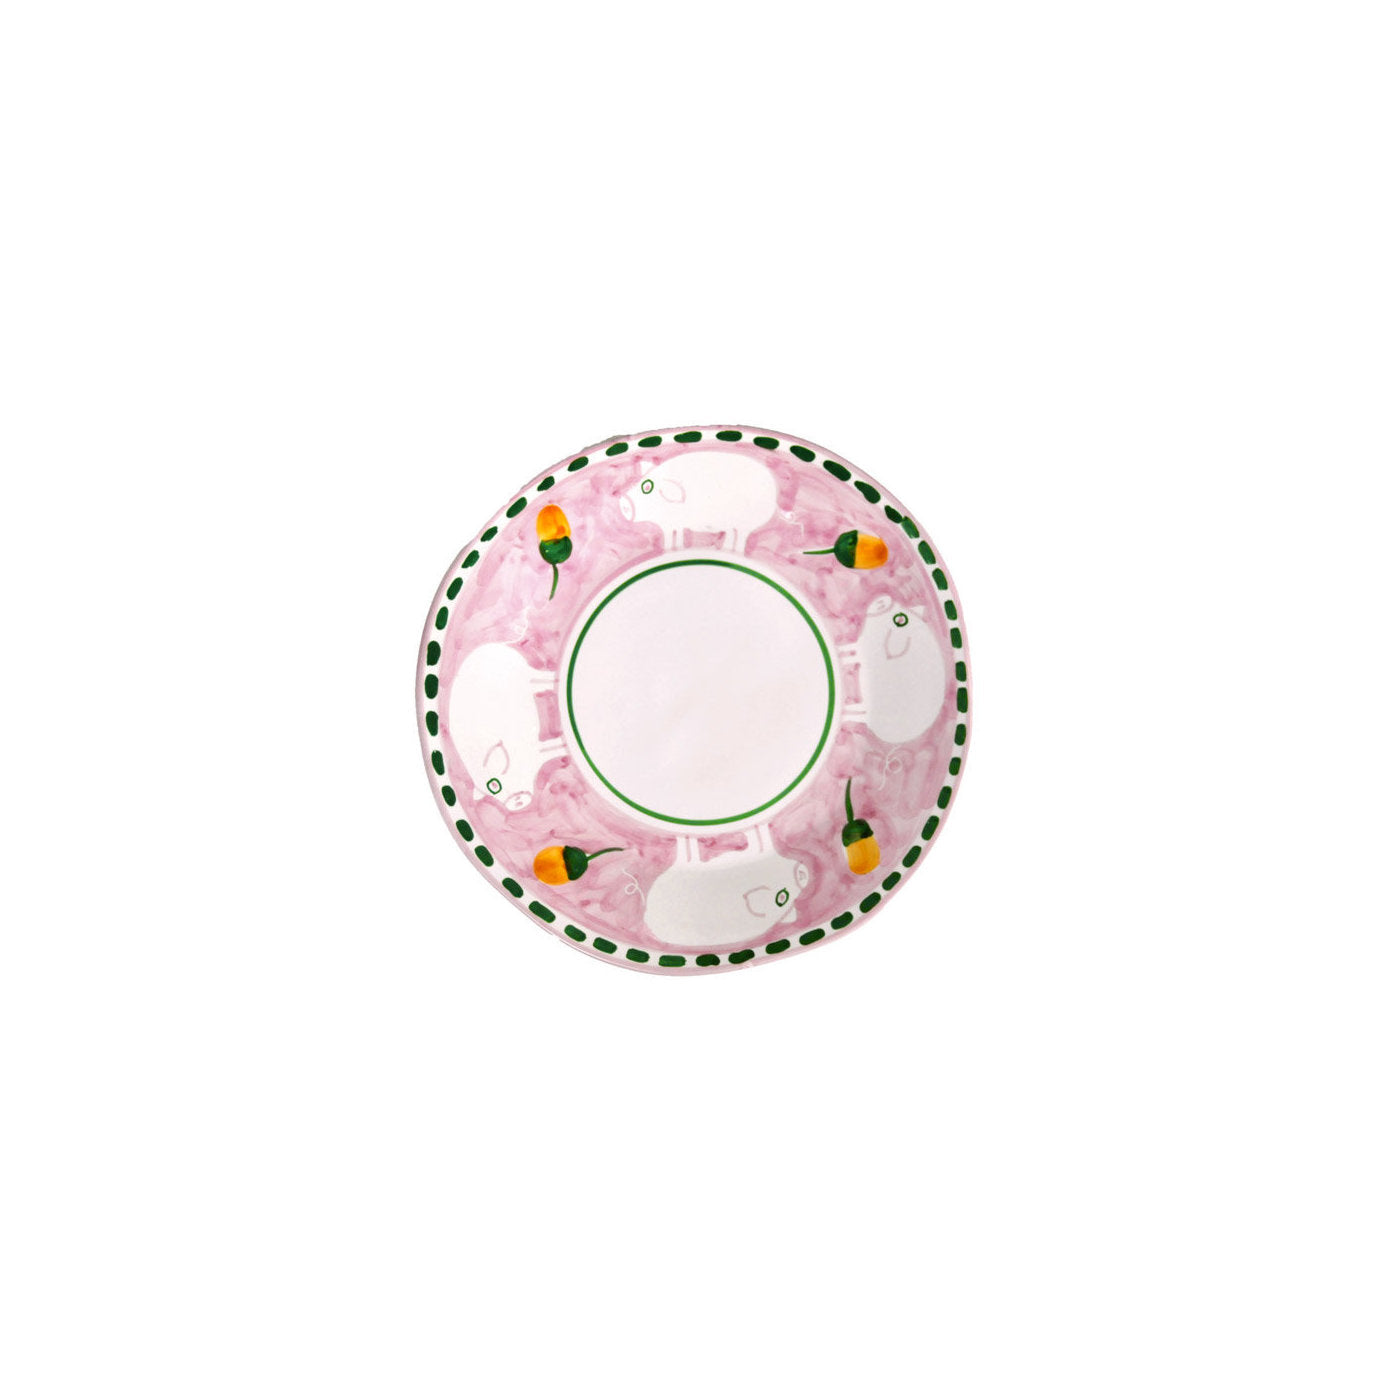 Cortile 18-Piece Pink Plate Setting - Alternative view 2